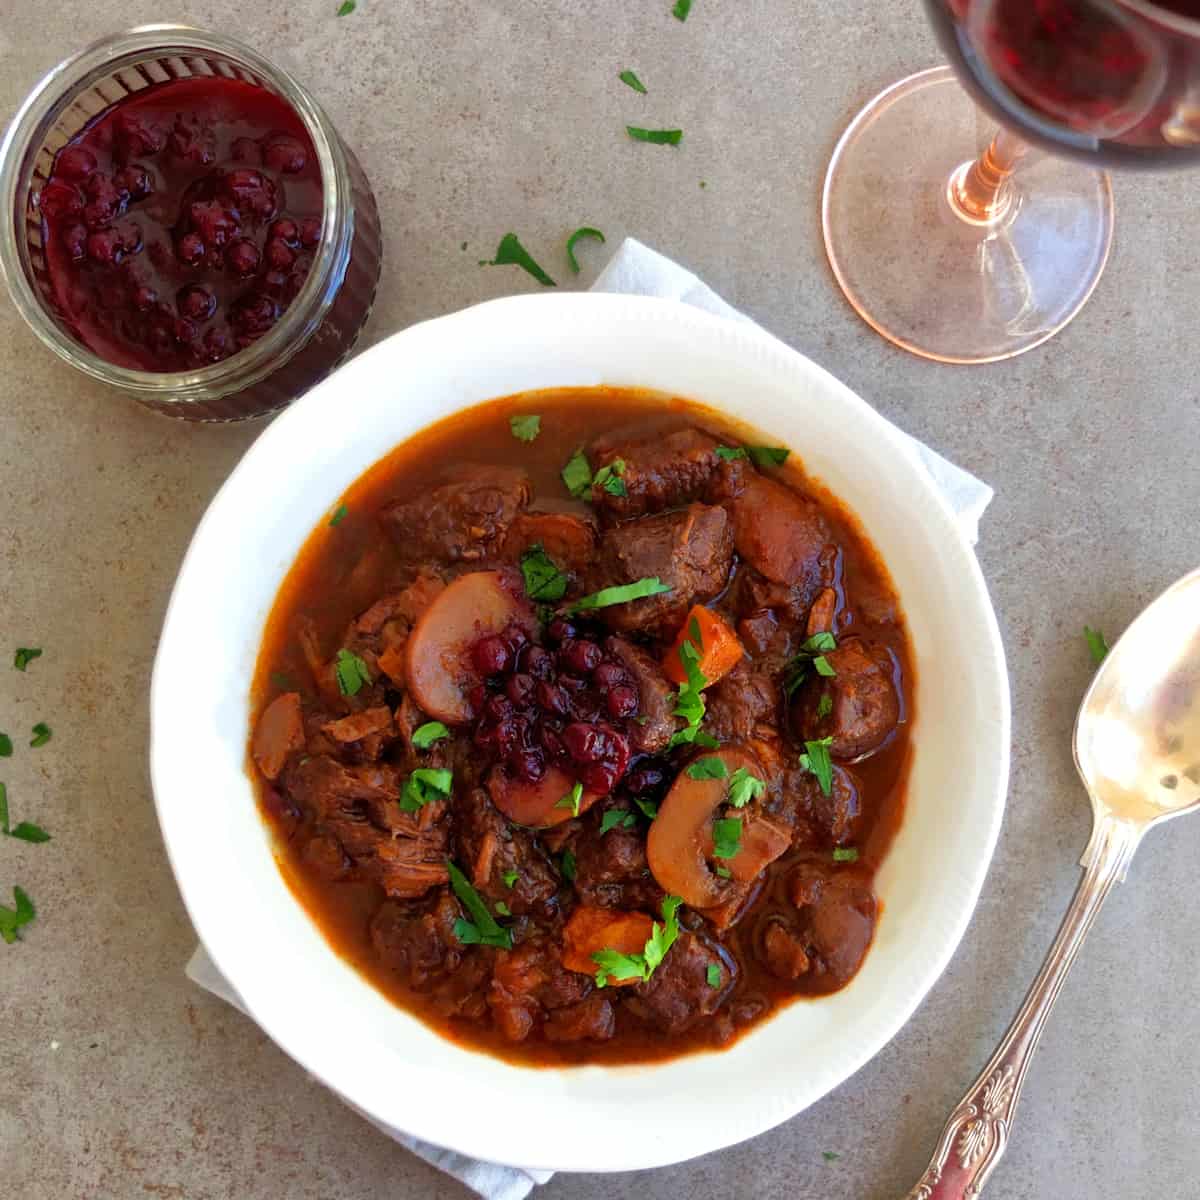 A plate with venison goulash above a jar with cranberry sauce. You can see half a wine glass.